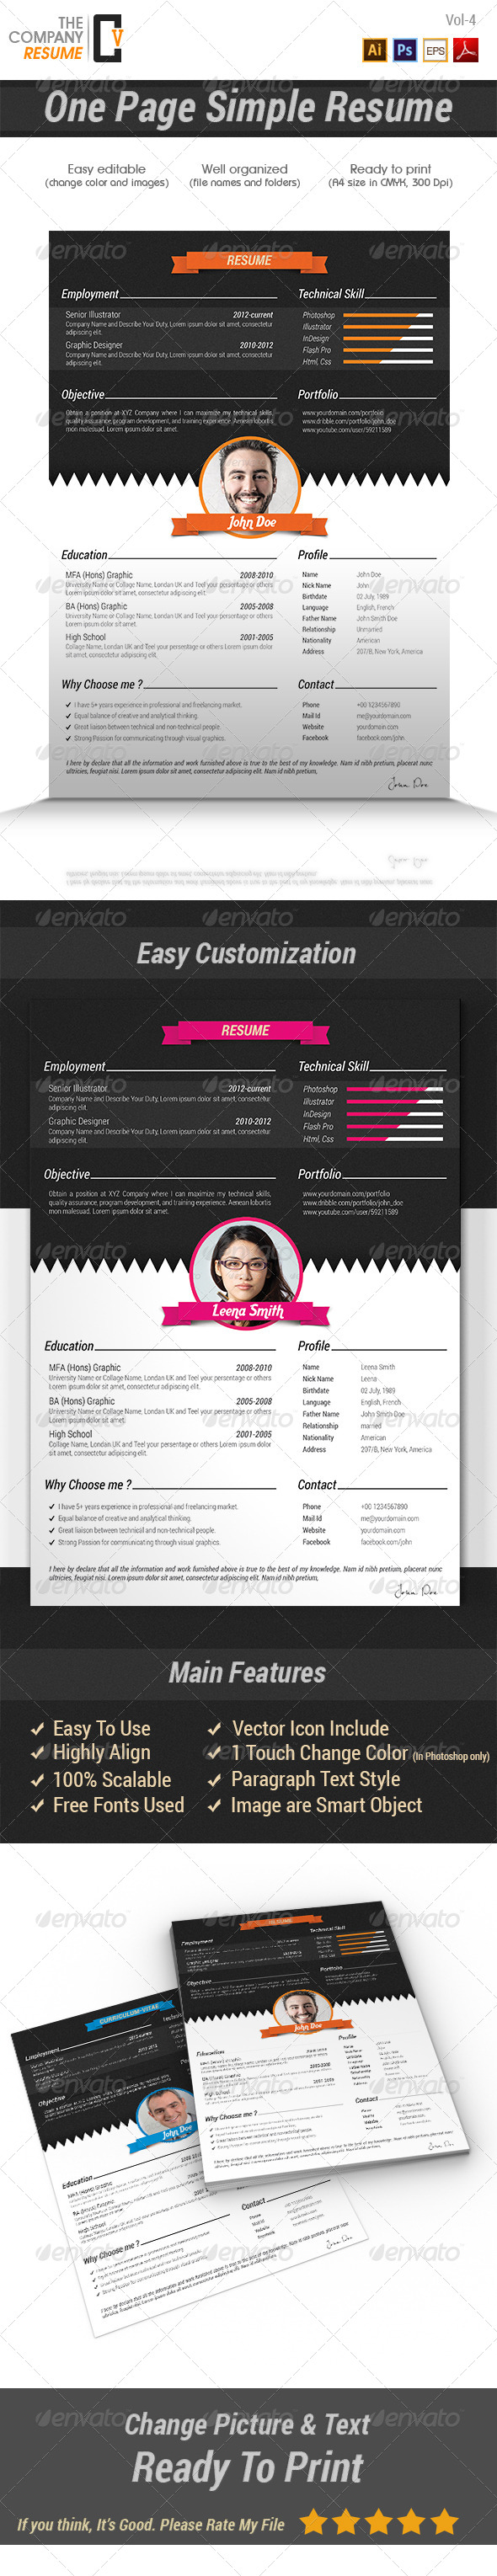 One Page Simple Resume